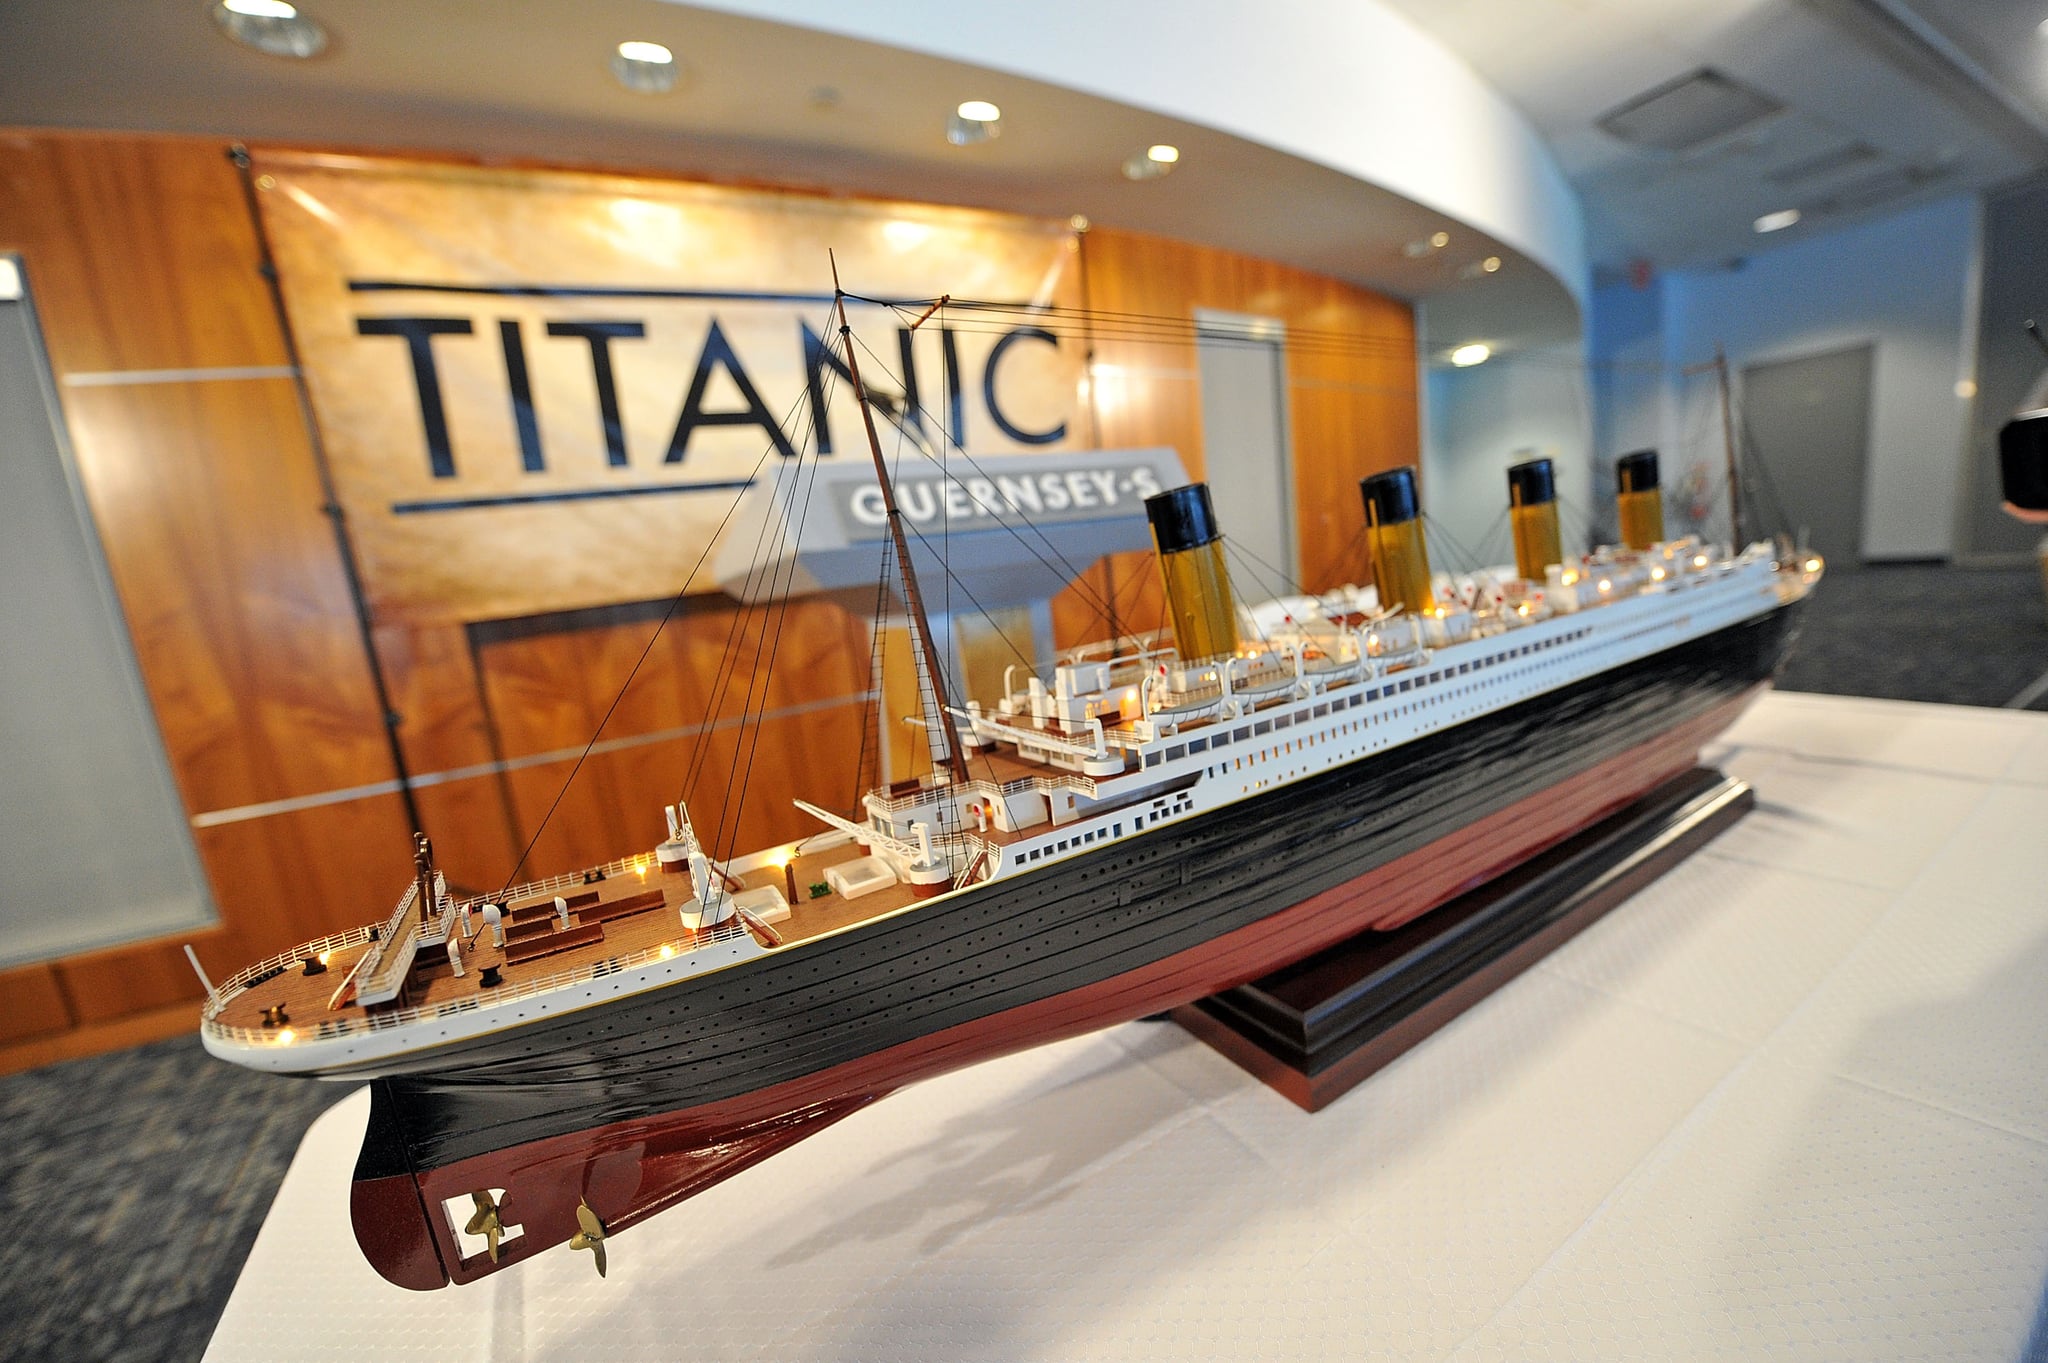 NEW YORK, NY - JANUARY 05:  A scale model of the RMS Titanic on display at the Titanic Auction preview at the Intrepid Sea-Air-Space Museum on January 5, 2012 in New York City.  (Photo by Mike Coppola/Getty Images)